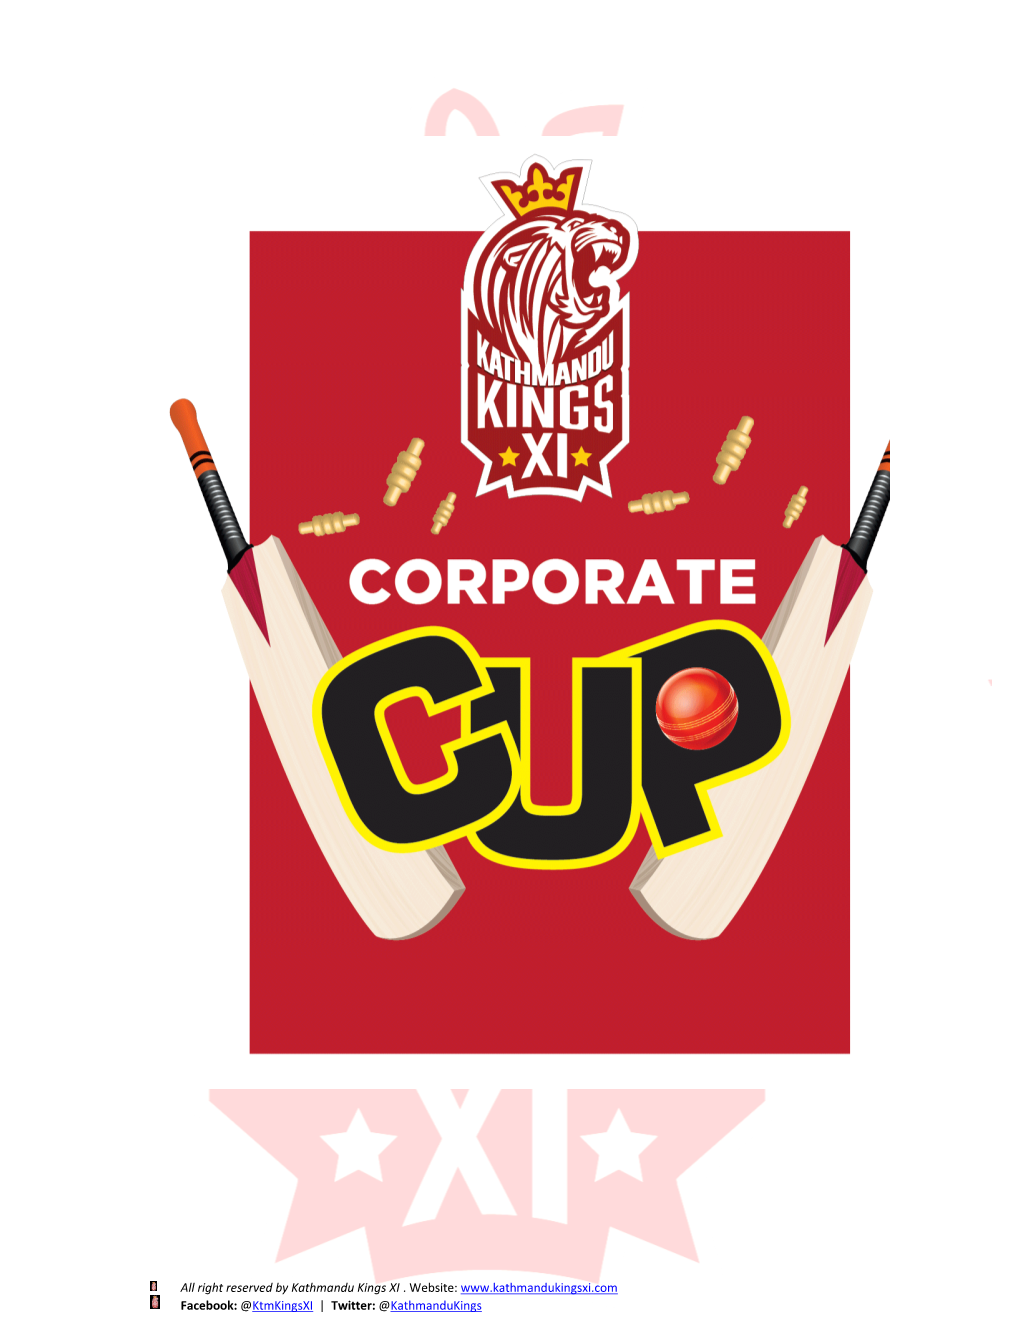 Why Corporate Cup